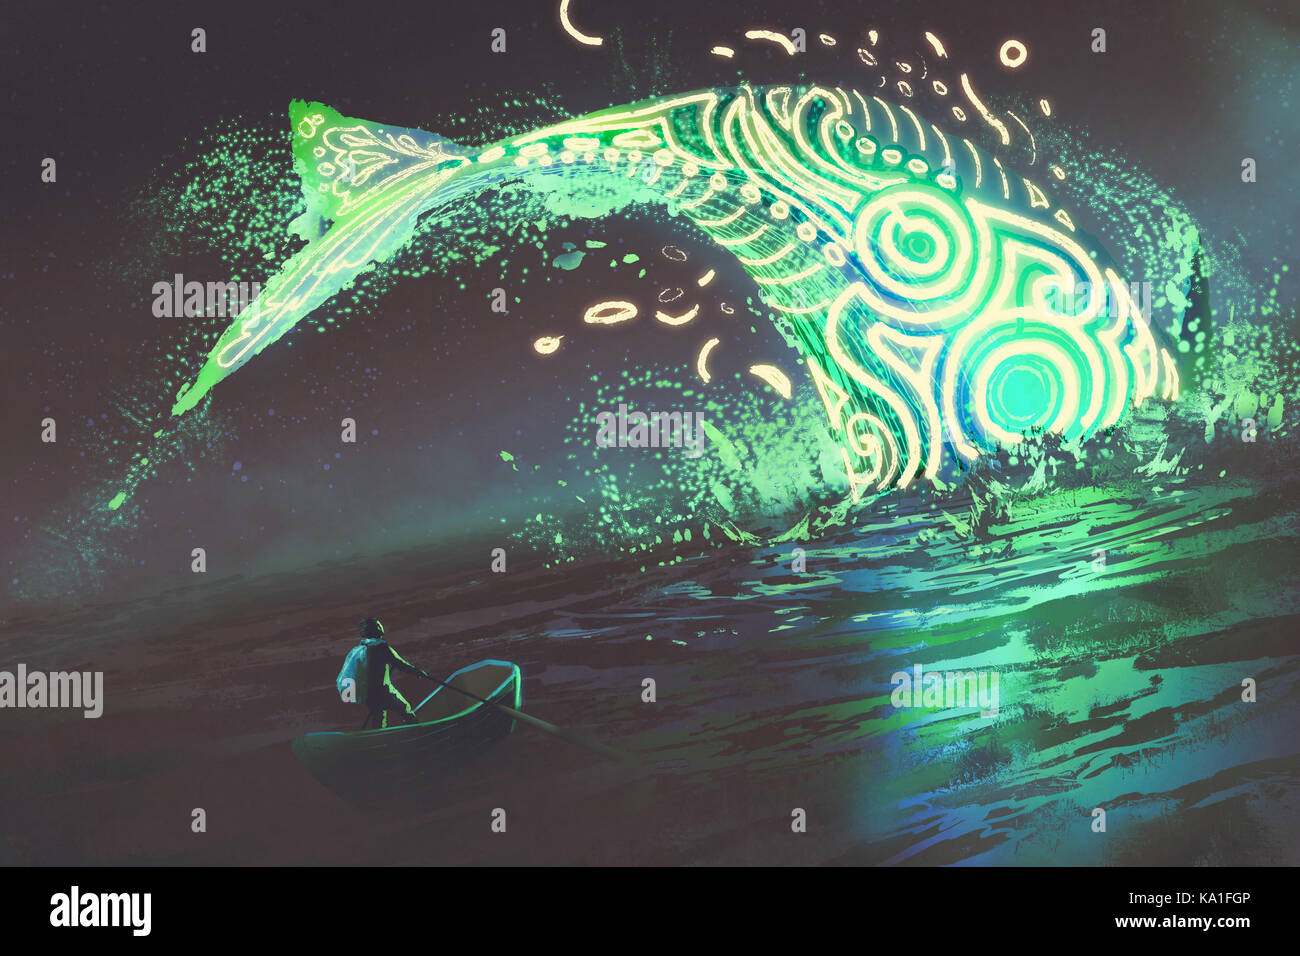 fantasy scenery of man on boat looking at the jumping glowing green whale in the sea, digital art style, illustration painting Stock Photo